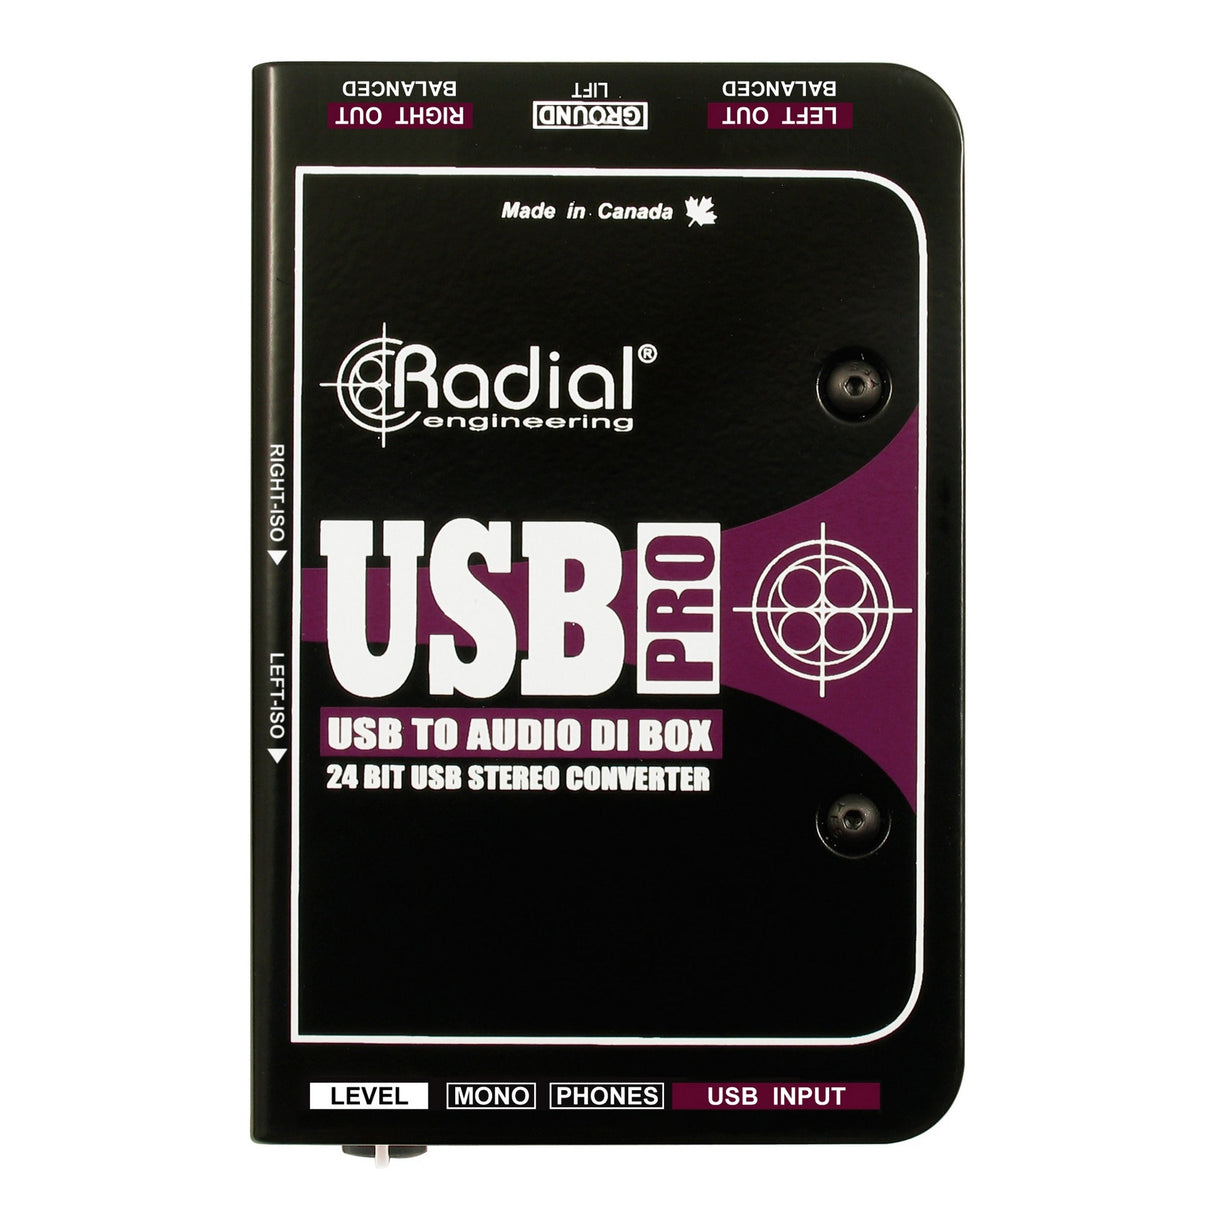 Radial USB-PRO Stereo USB Laptop Direct Injection Box (Used)